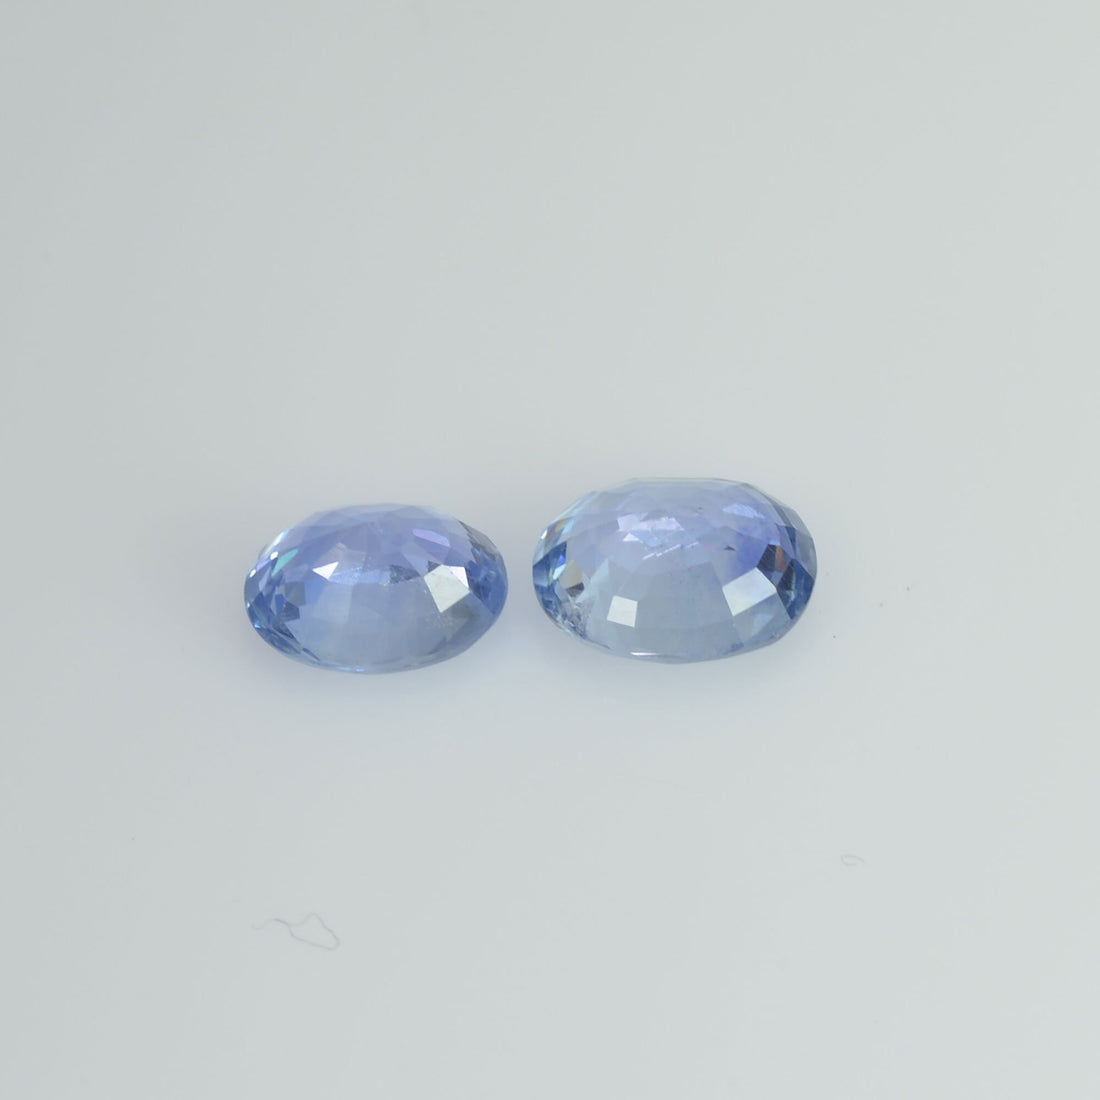 1.69 cts Natural Blue Sapphire Loose Pair Gemstone Oval Cut